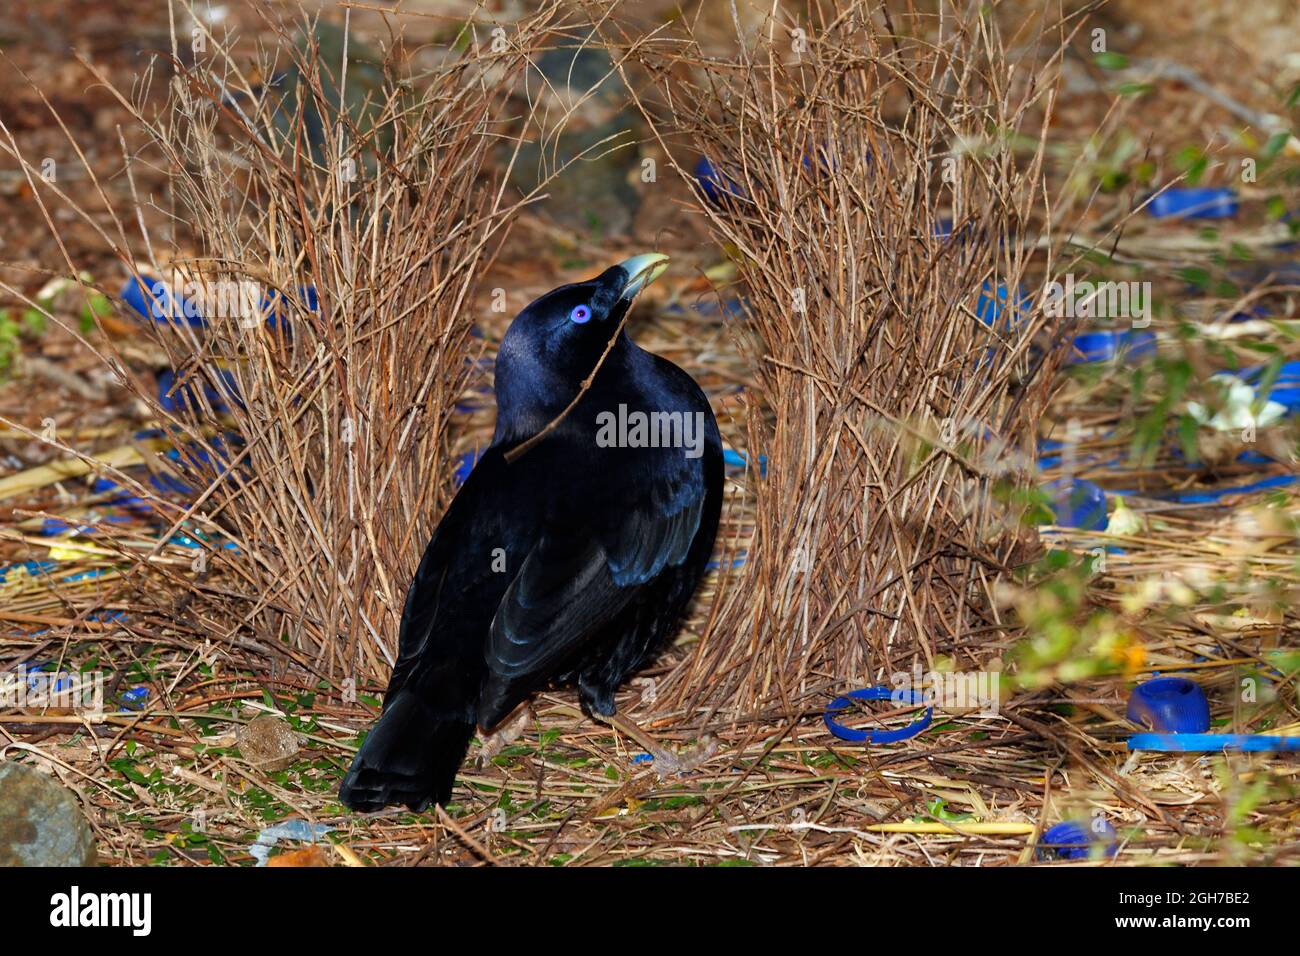 Male Satin Bowerbird, Ptilonorhynchus violaceus, building his bower. These birds use a bower made of sticks, decorated with blue and yellow objects, t Stock Photo